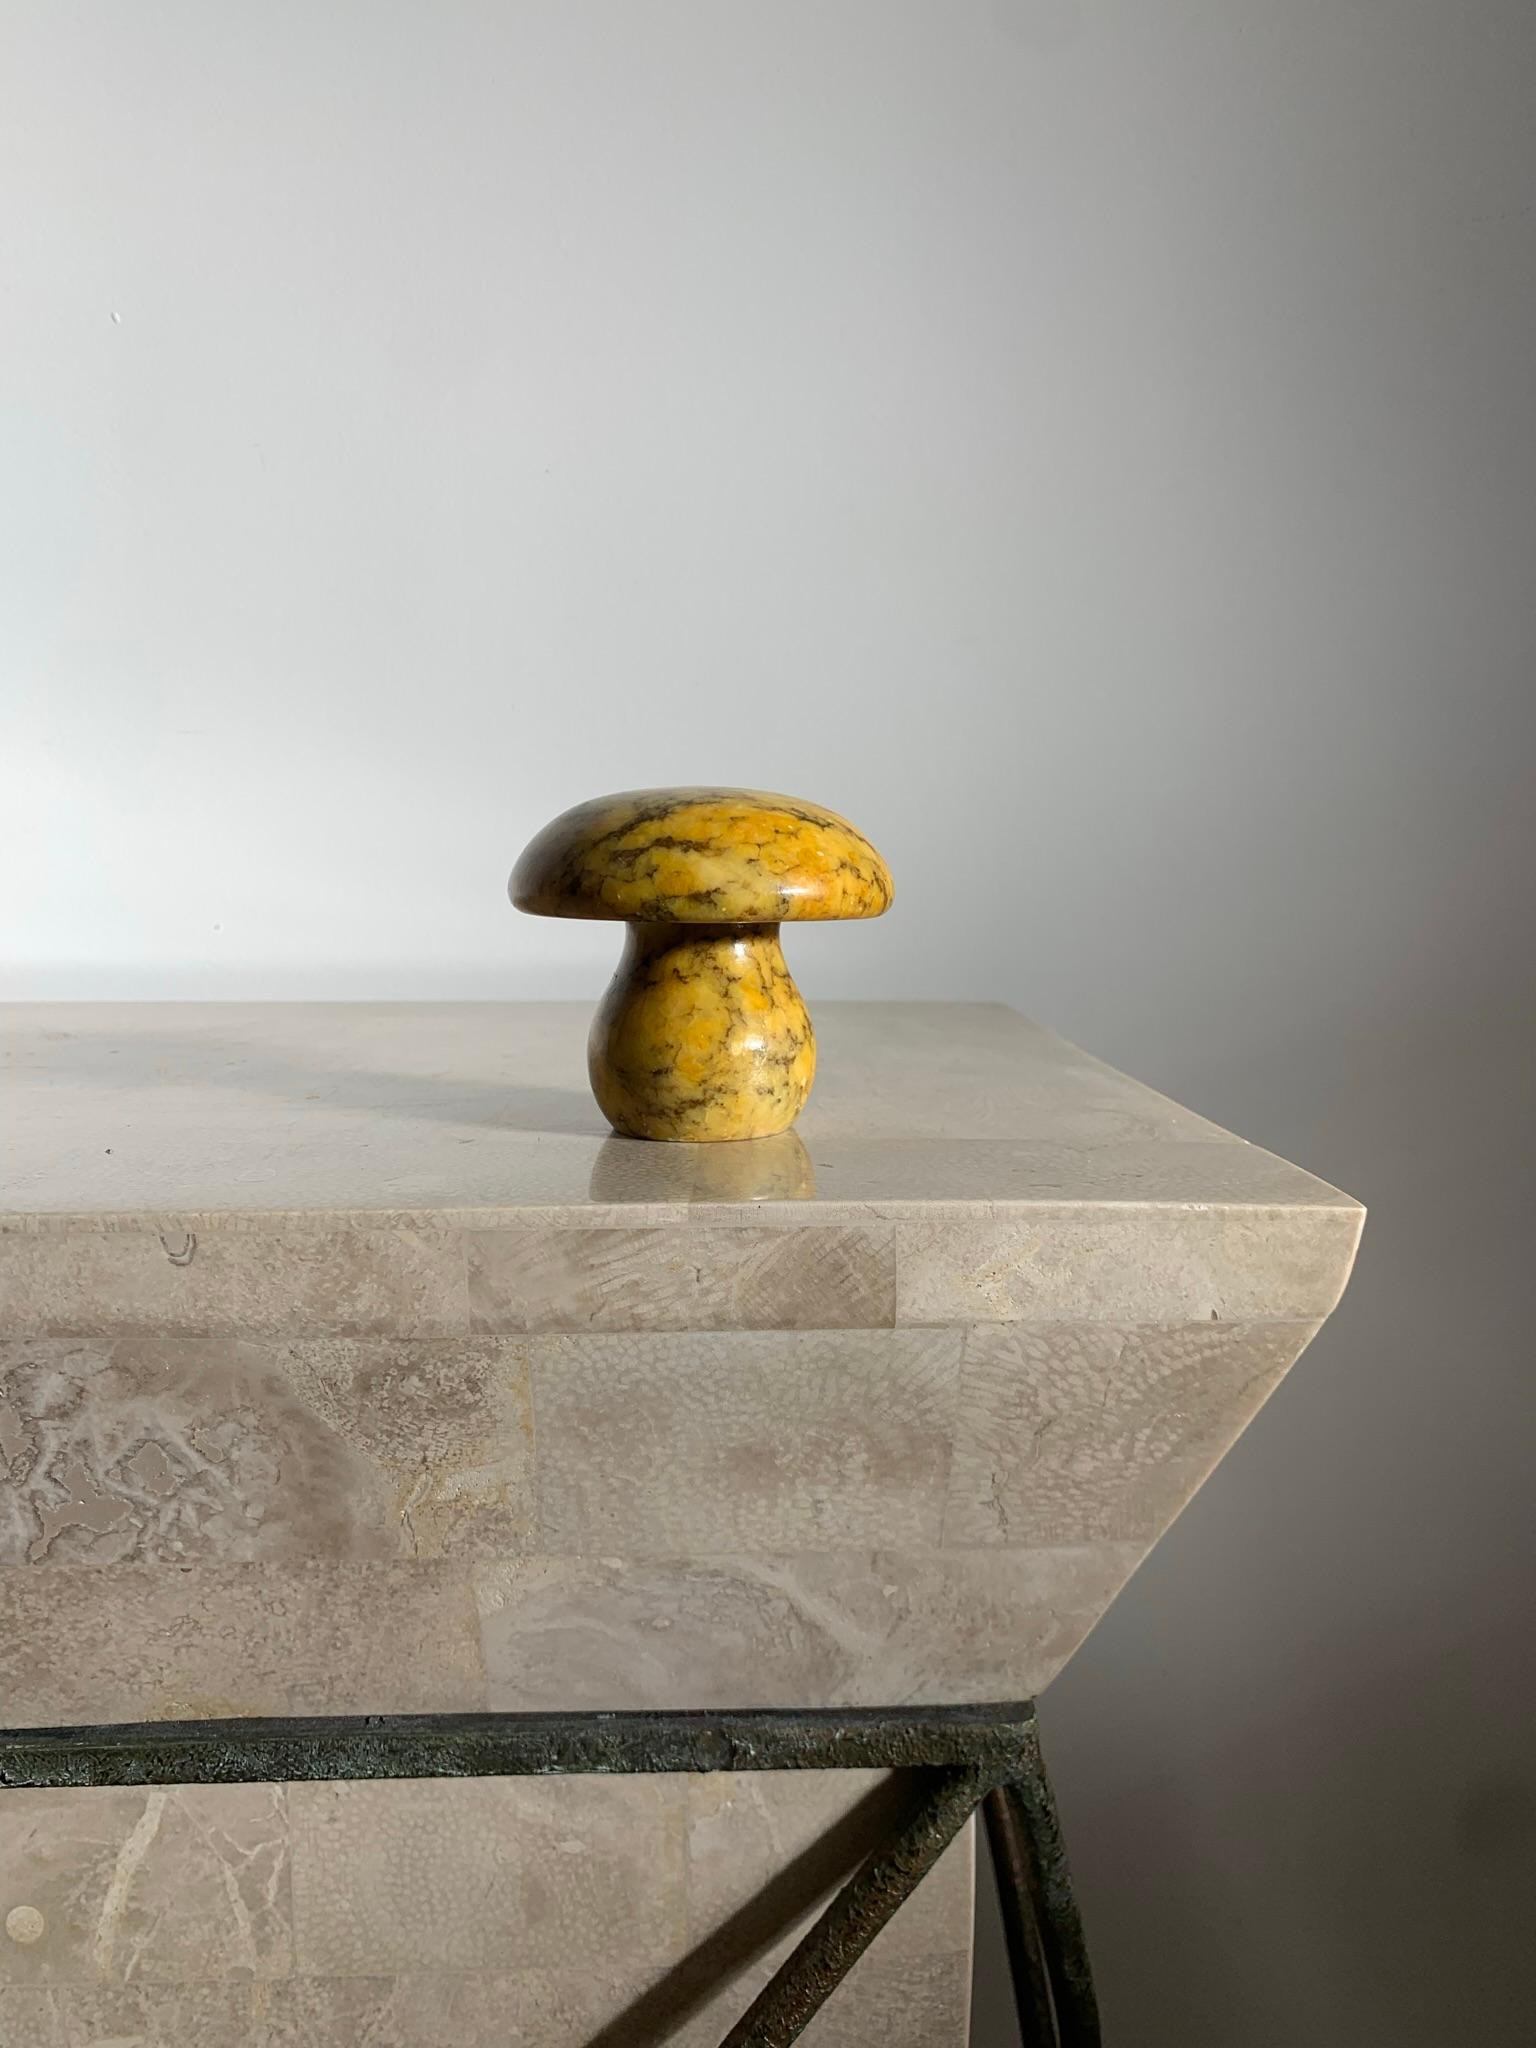 An alabaster marble mushroom objet d’art or paperweight, hand-carved in Italy circa 1960s. Hue is turmeric / mustard / saffron yellow with charcoal veining. Wear consistent with age and use but no glaring flaws. Excellent as a gift or for any lover